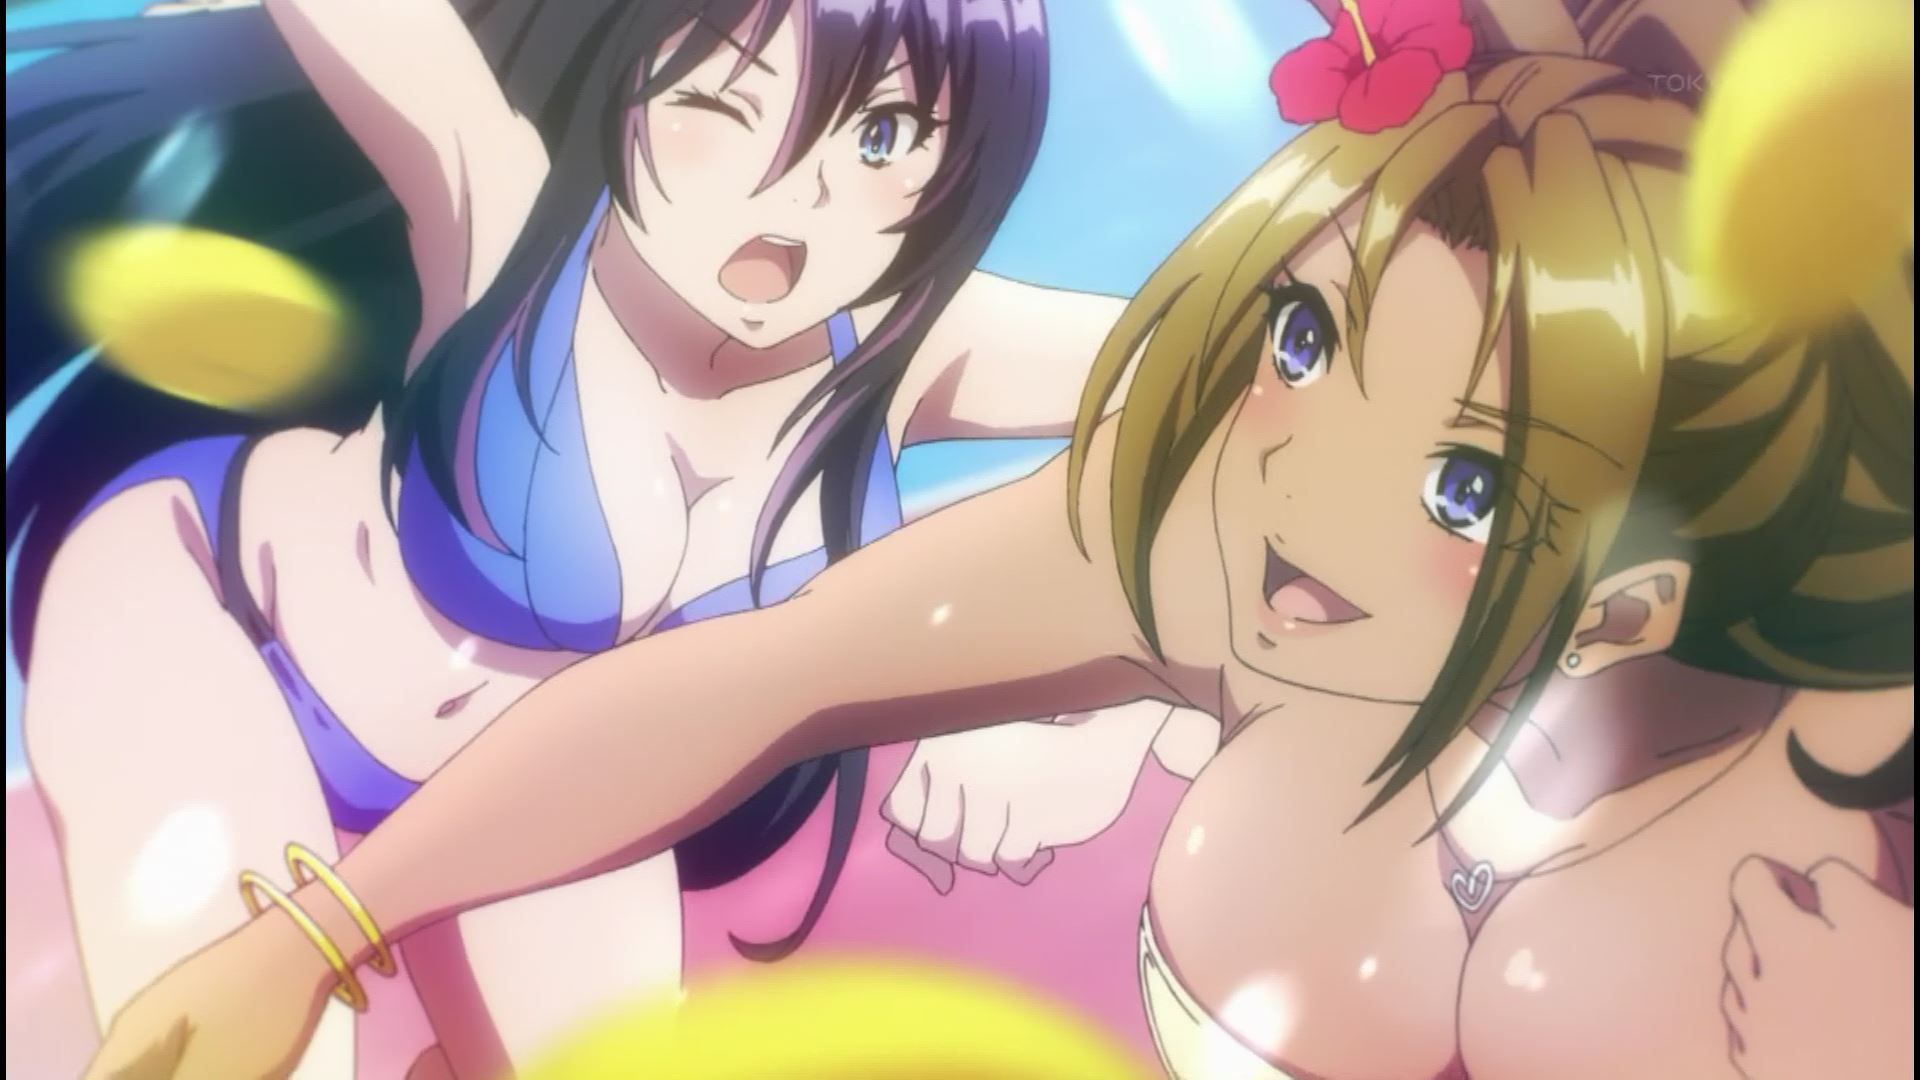 Anime [Kandagawa JETGIRLS] 6 episodes, such as girls' very cute swimsuit and naked! 26